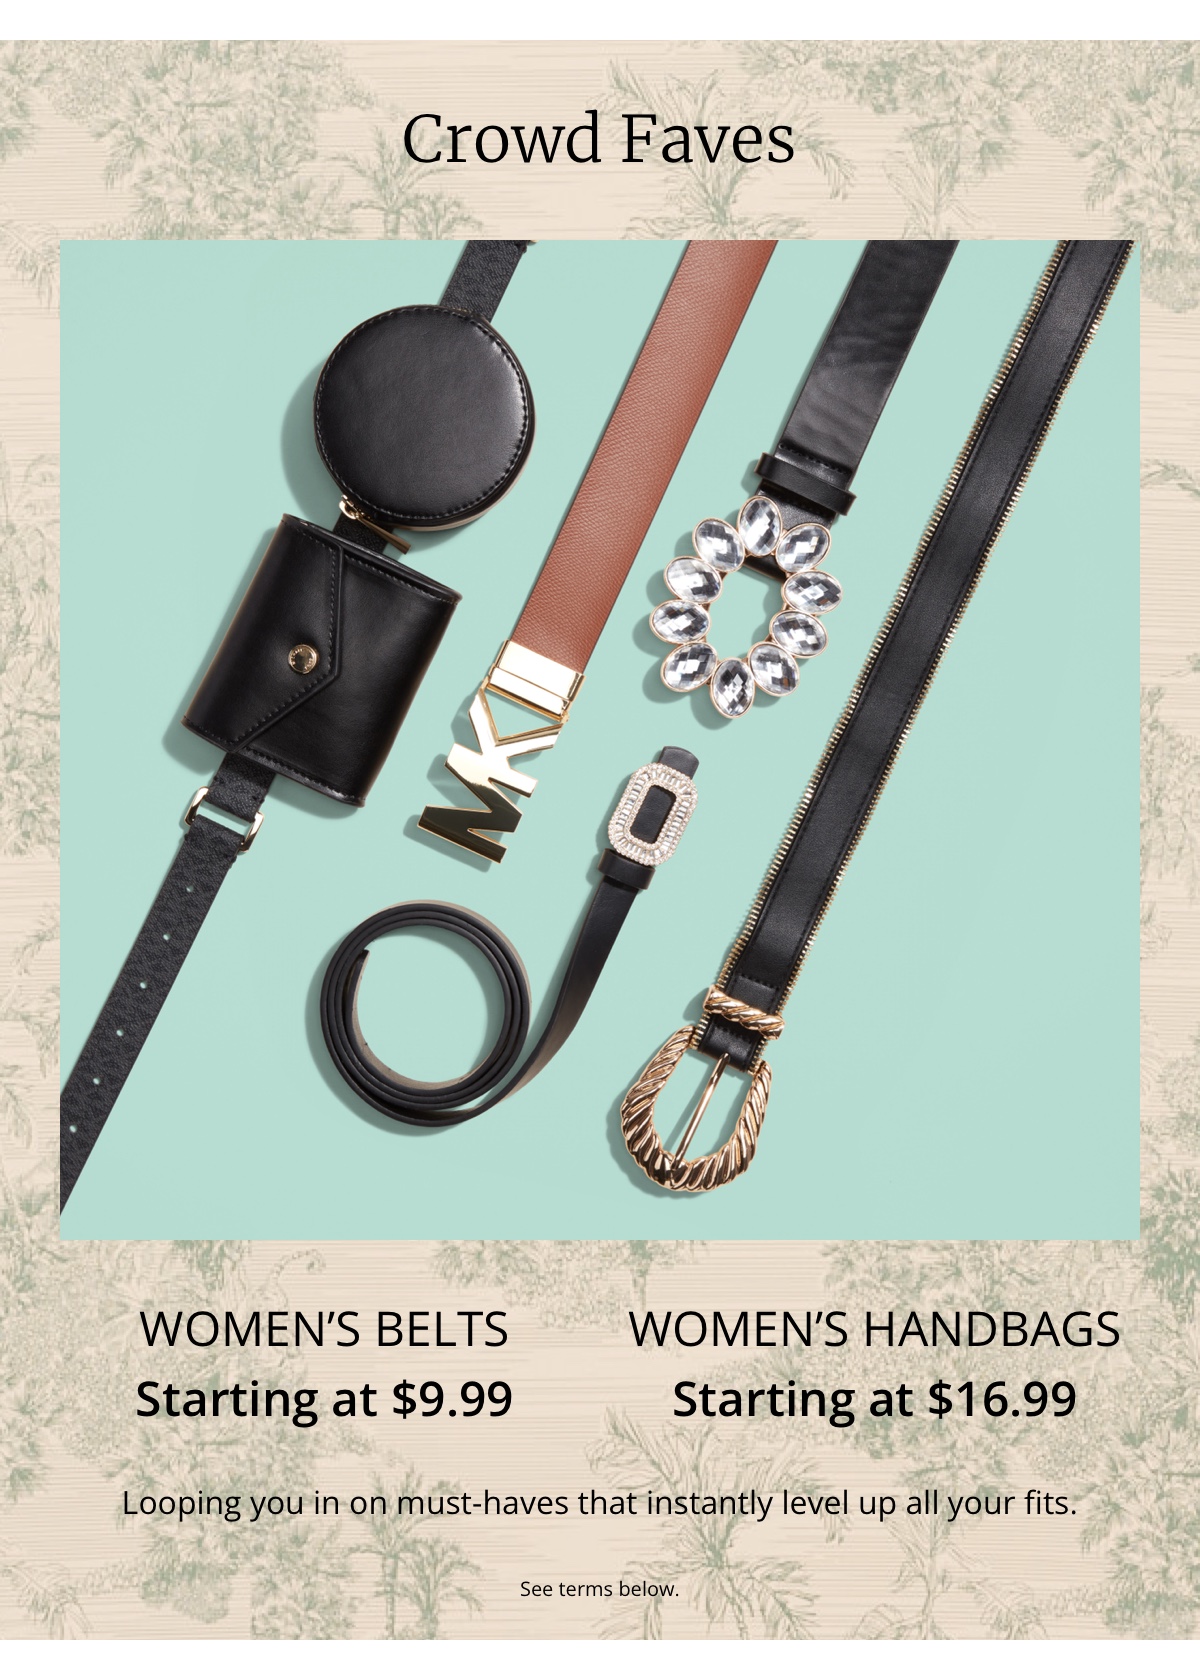 Crowd Faves|Womens Belts|Starting at $9.99|Womens Handbags|Starting at $16.99|Looping you in on must-haves that instantly level up all your fits.|See terms below.